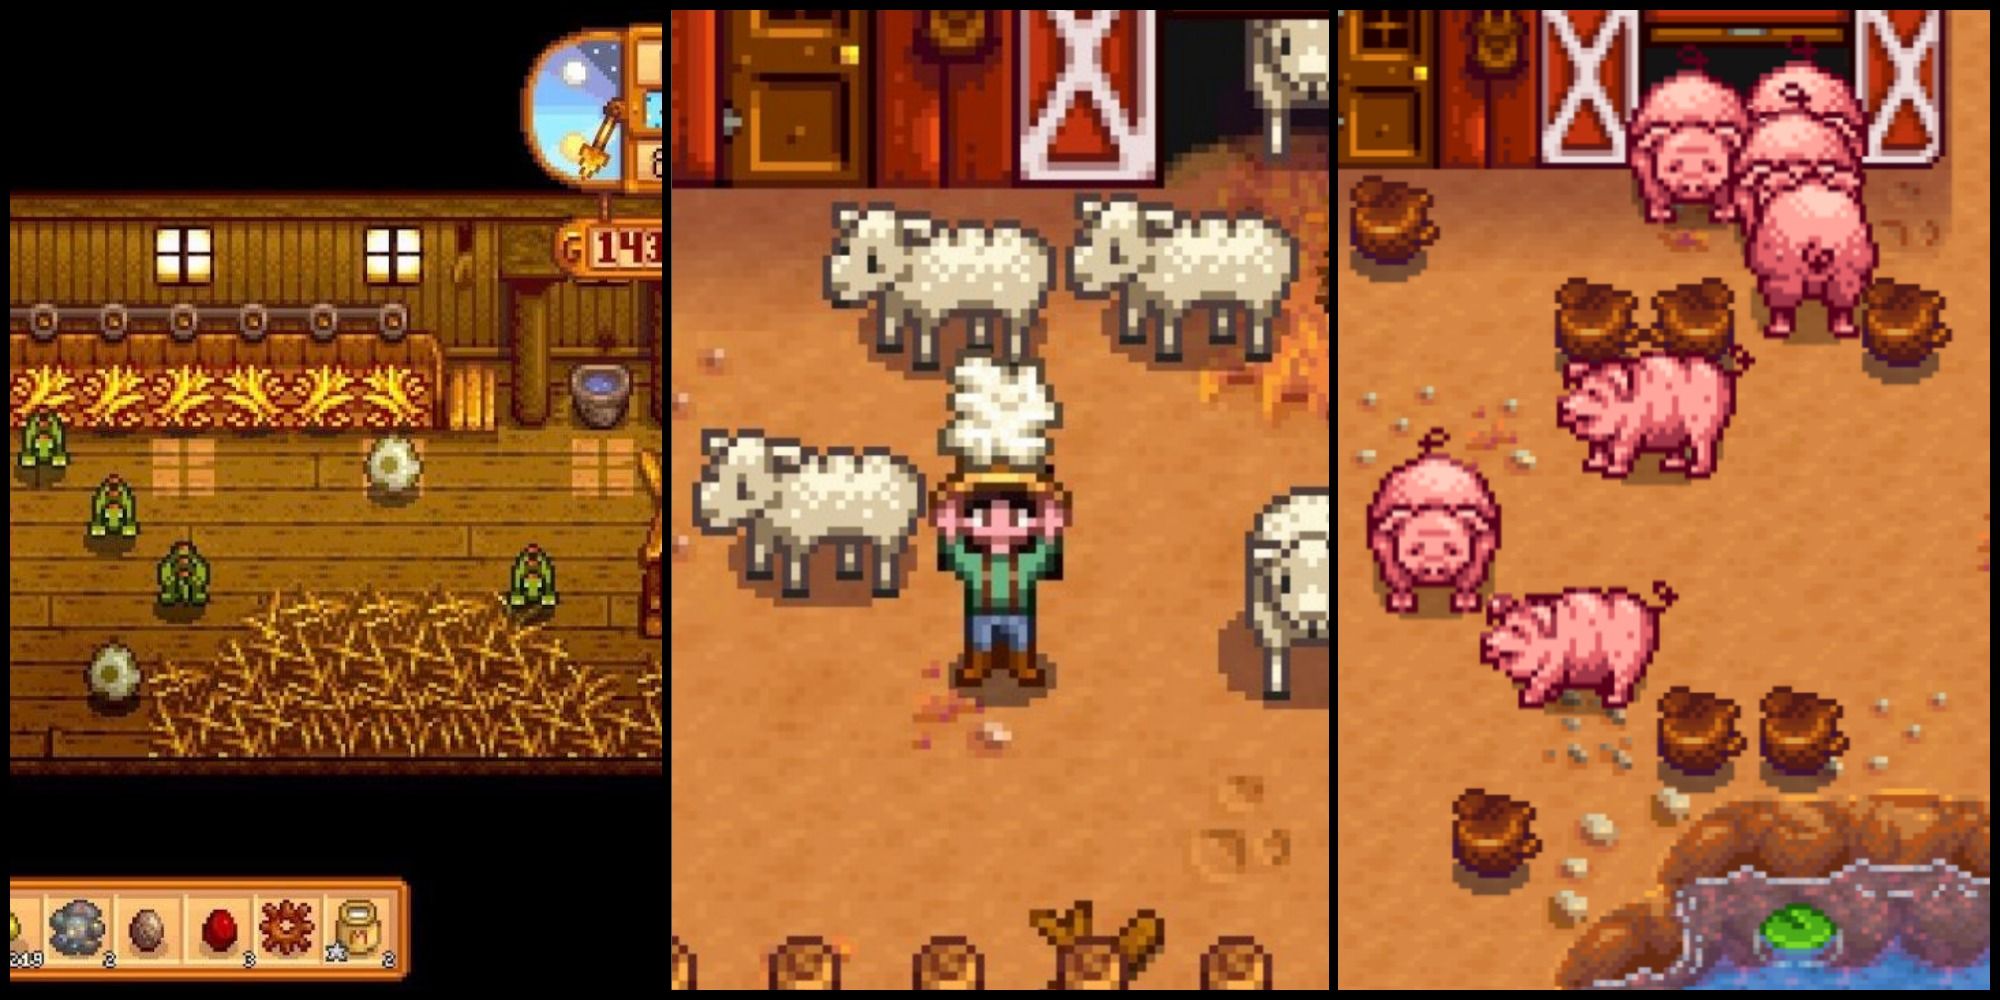 Stardew Valley Split Image of Dinosaurs in a Coop, Player Holding Wool, and Pigs Outside with Truffles